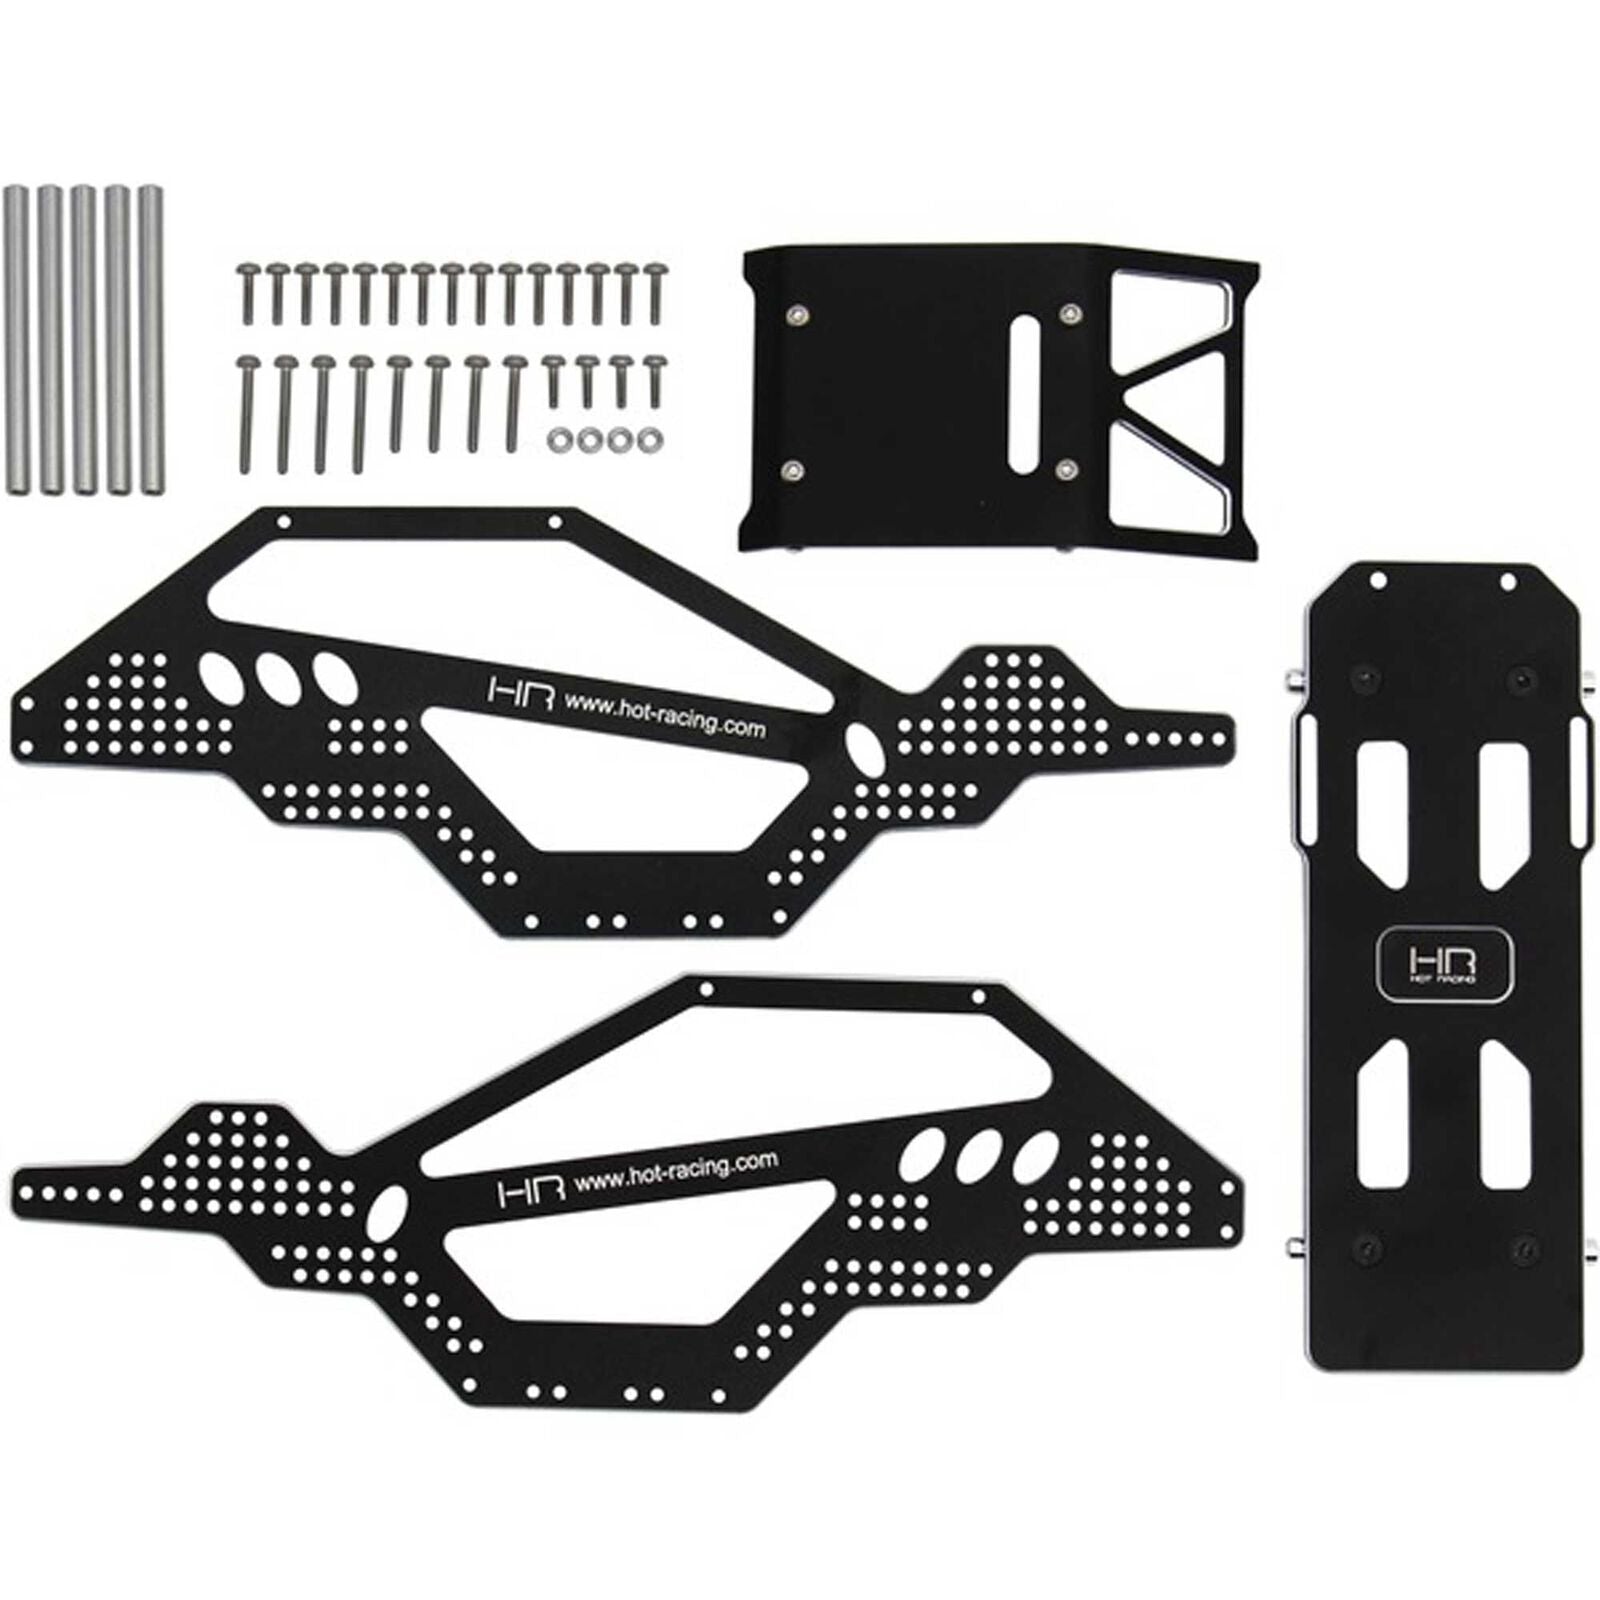 HOT RACING SXTF14RR01 Aluminum Rock Racer Conversion Chassis Black for SCX24